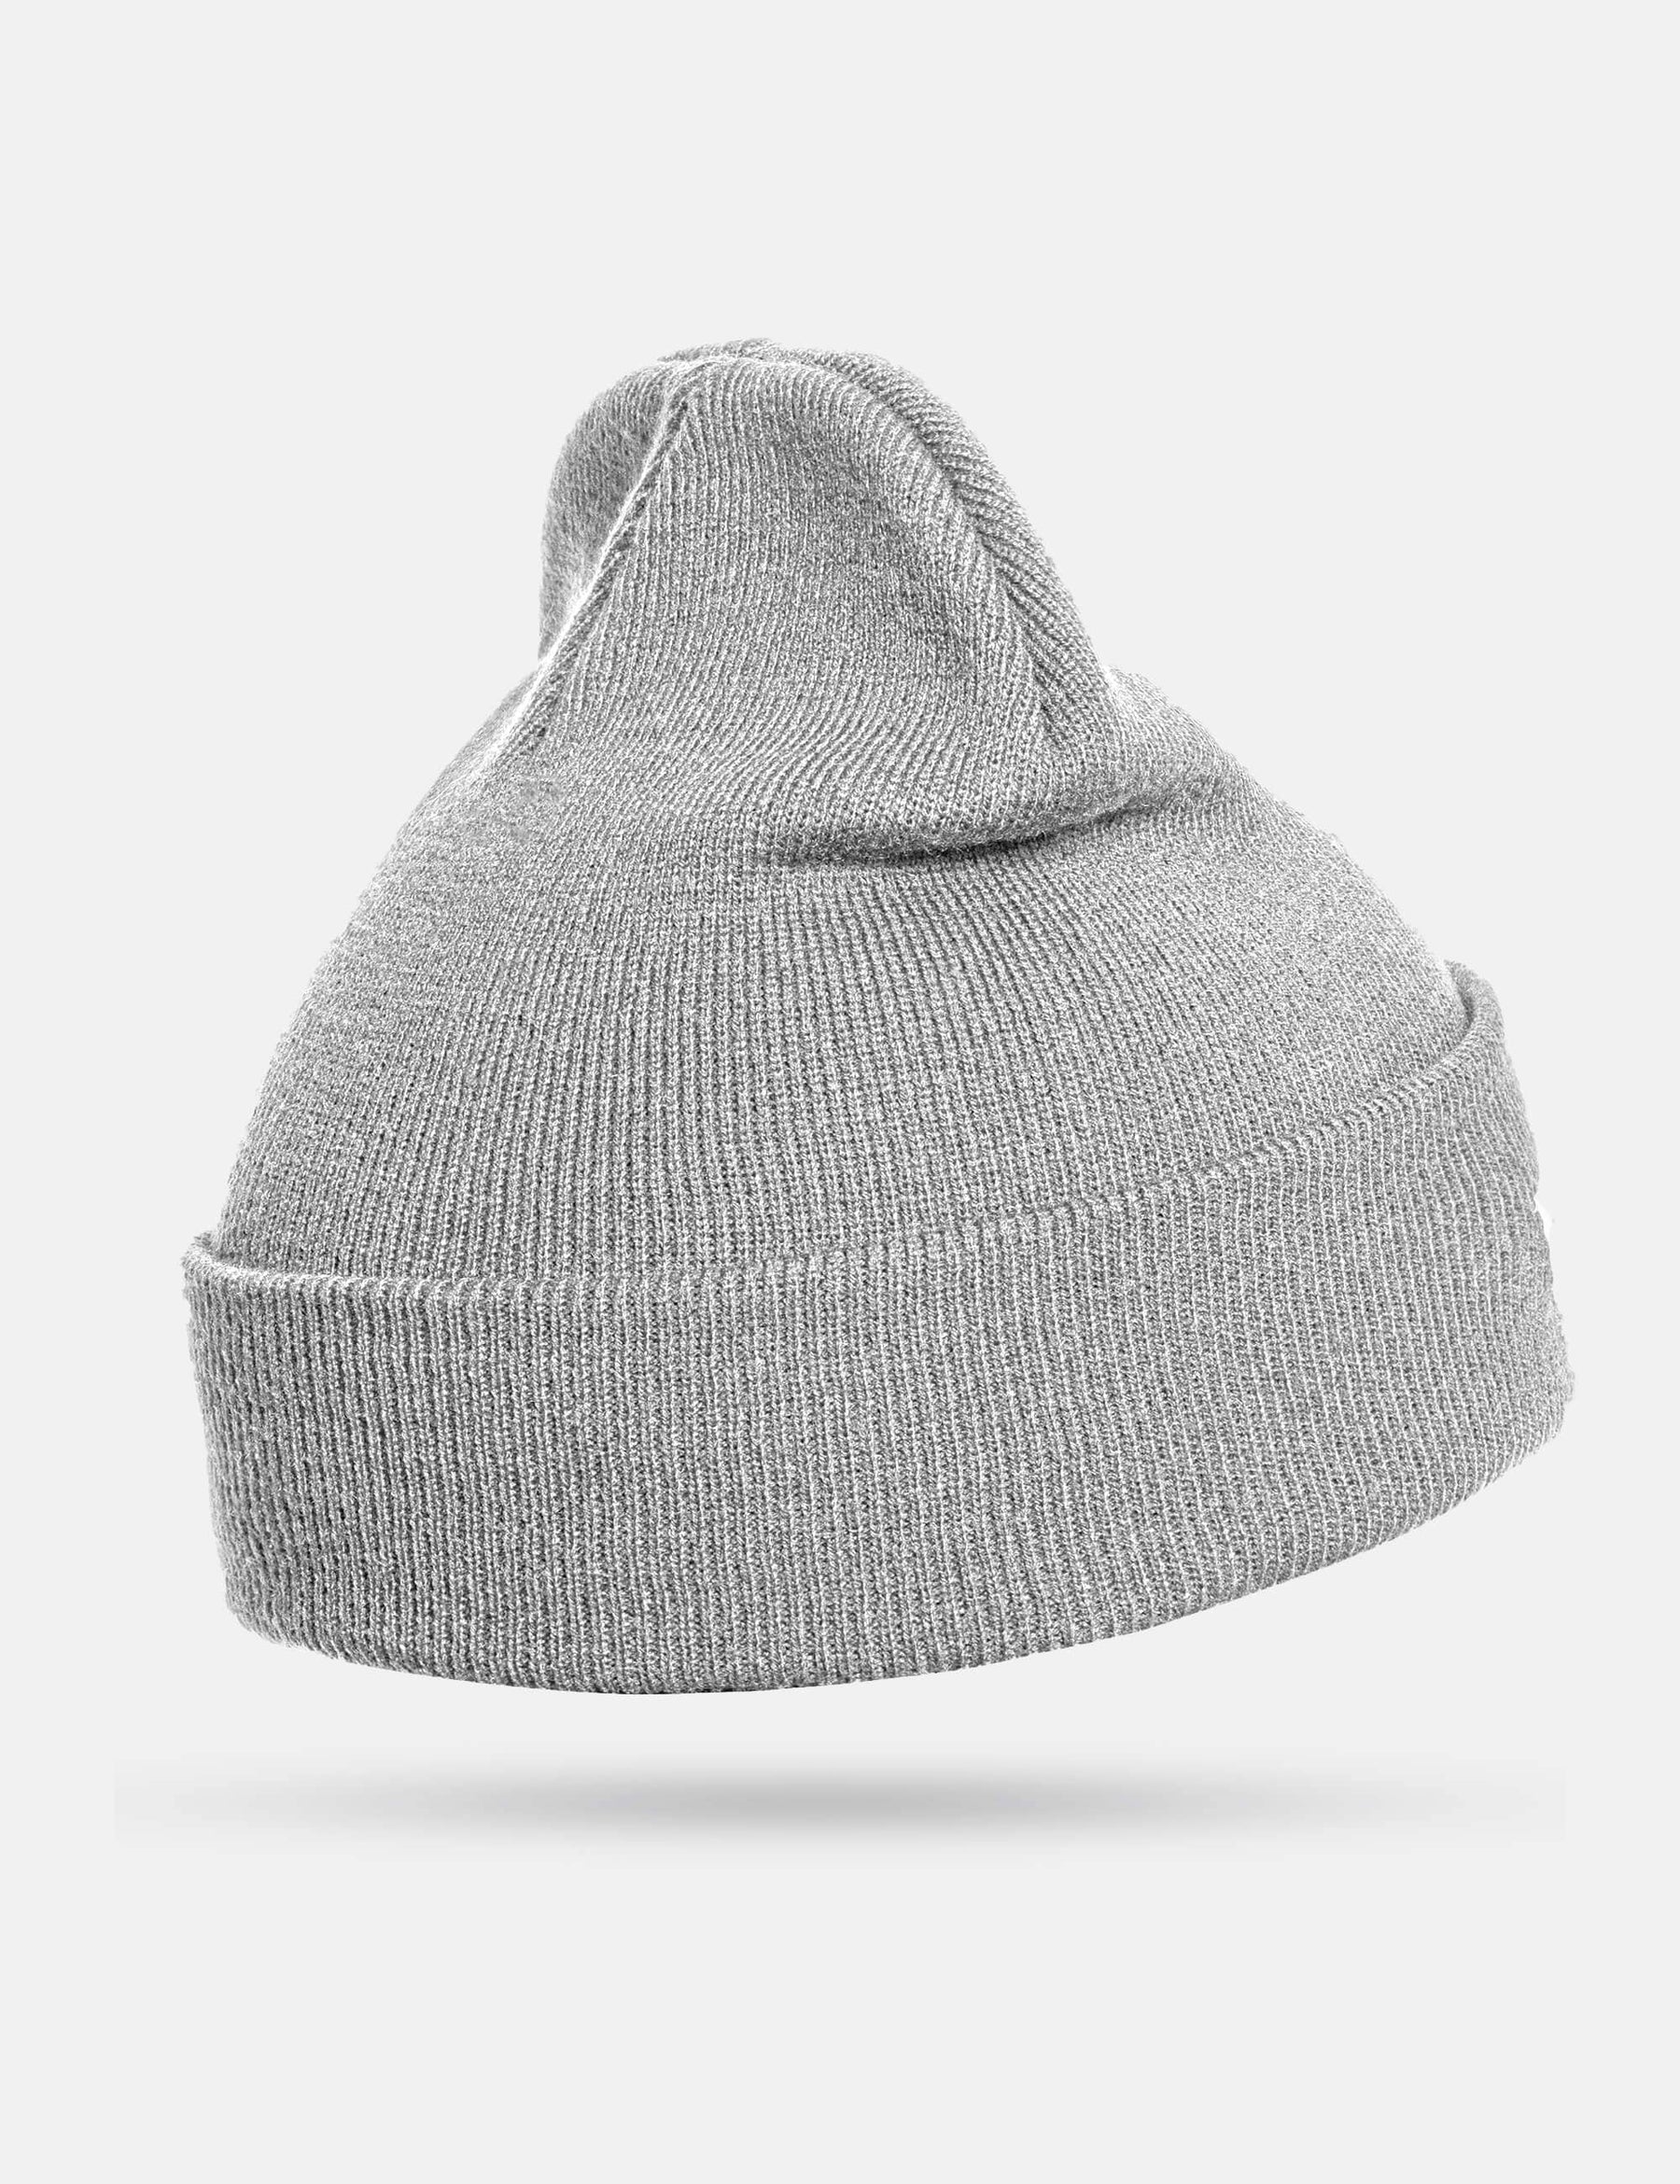 Side view of the GORNATION light grey beanie.